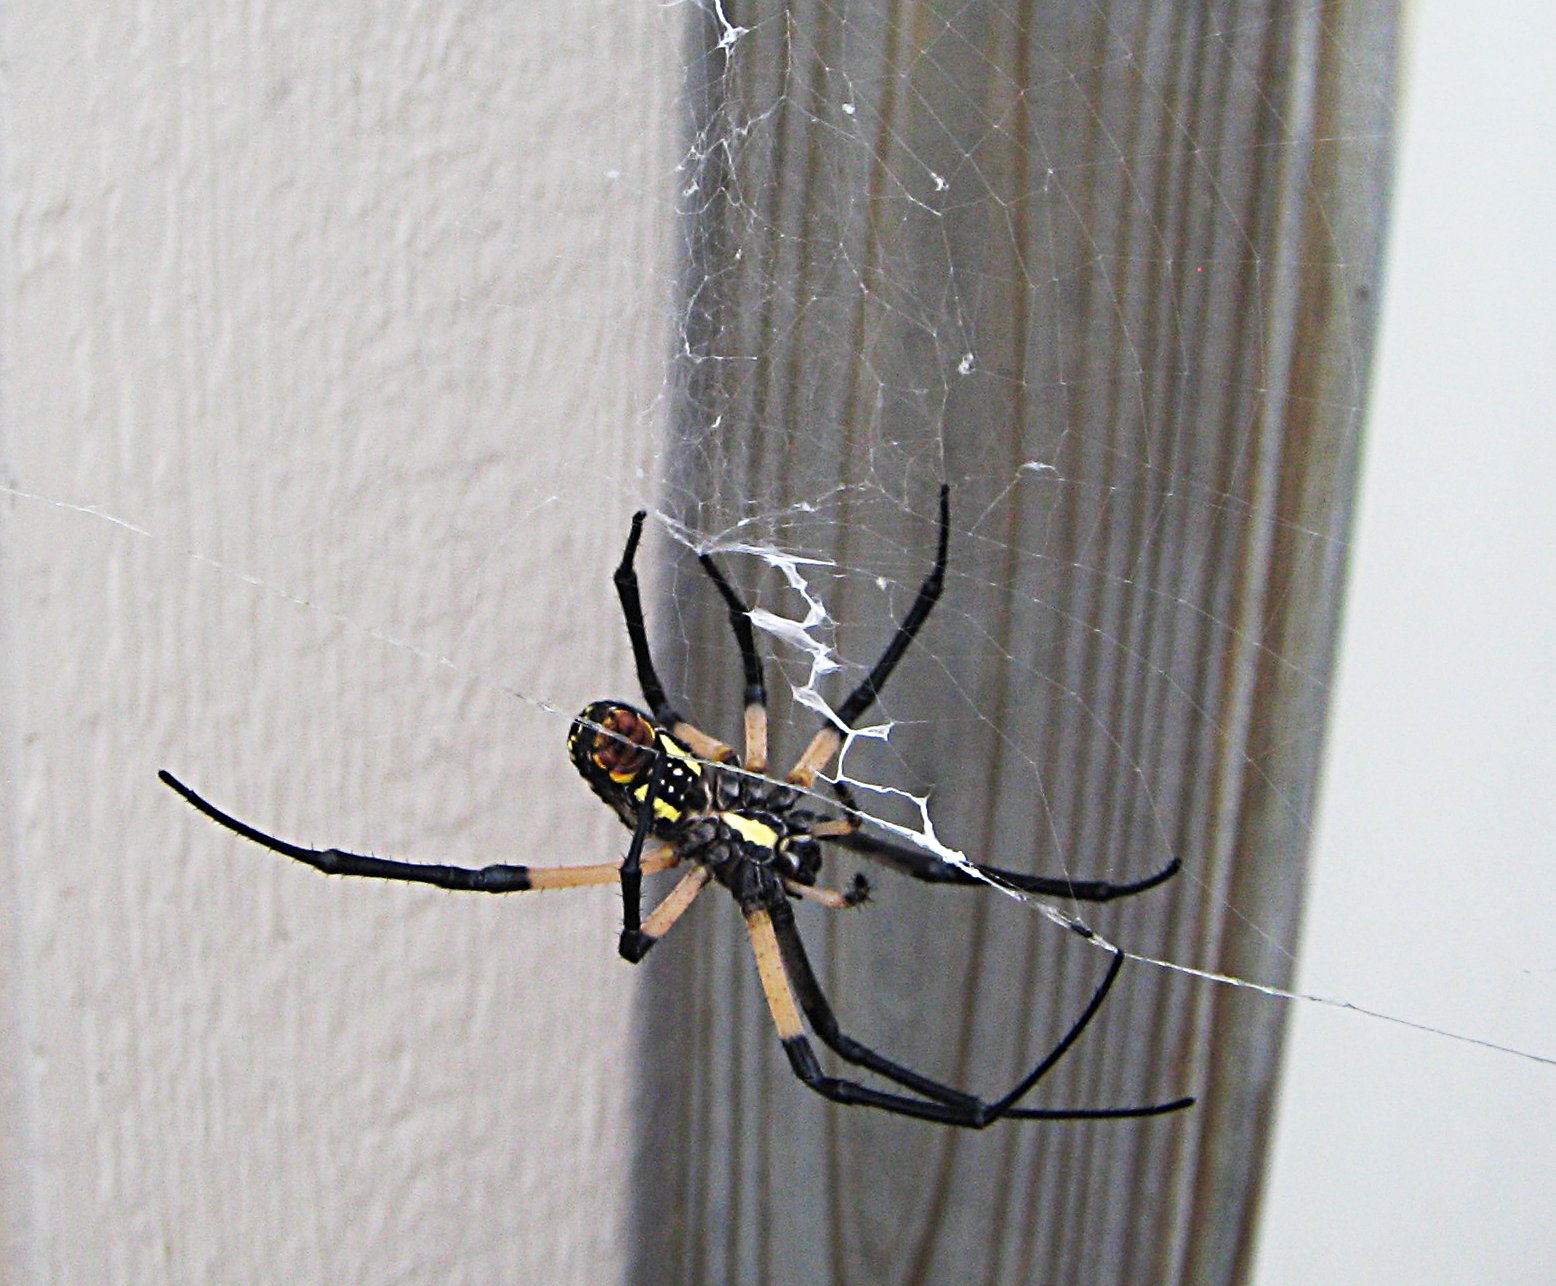 a big spider is on its web and ready to strike it